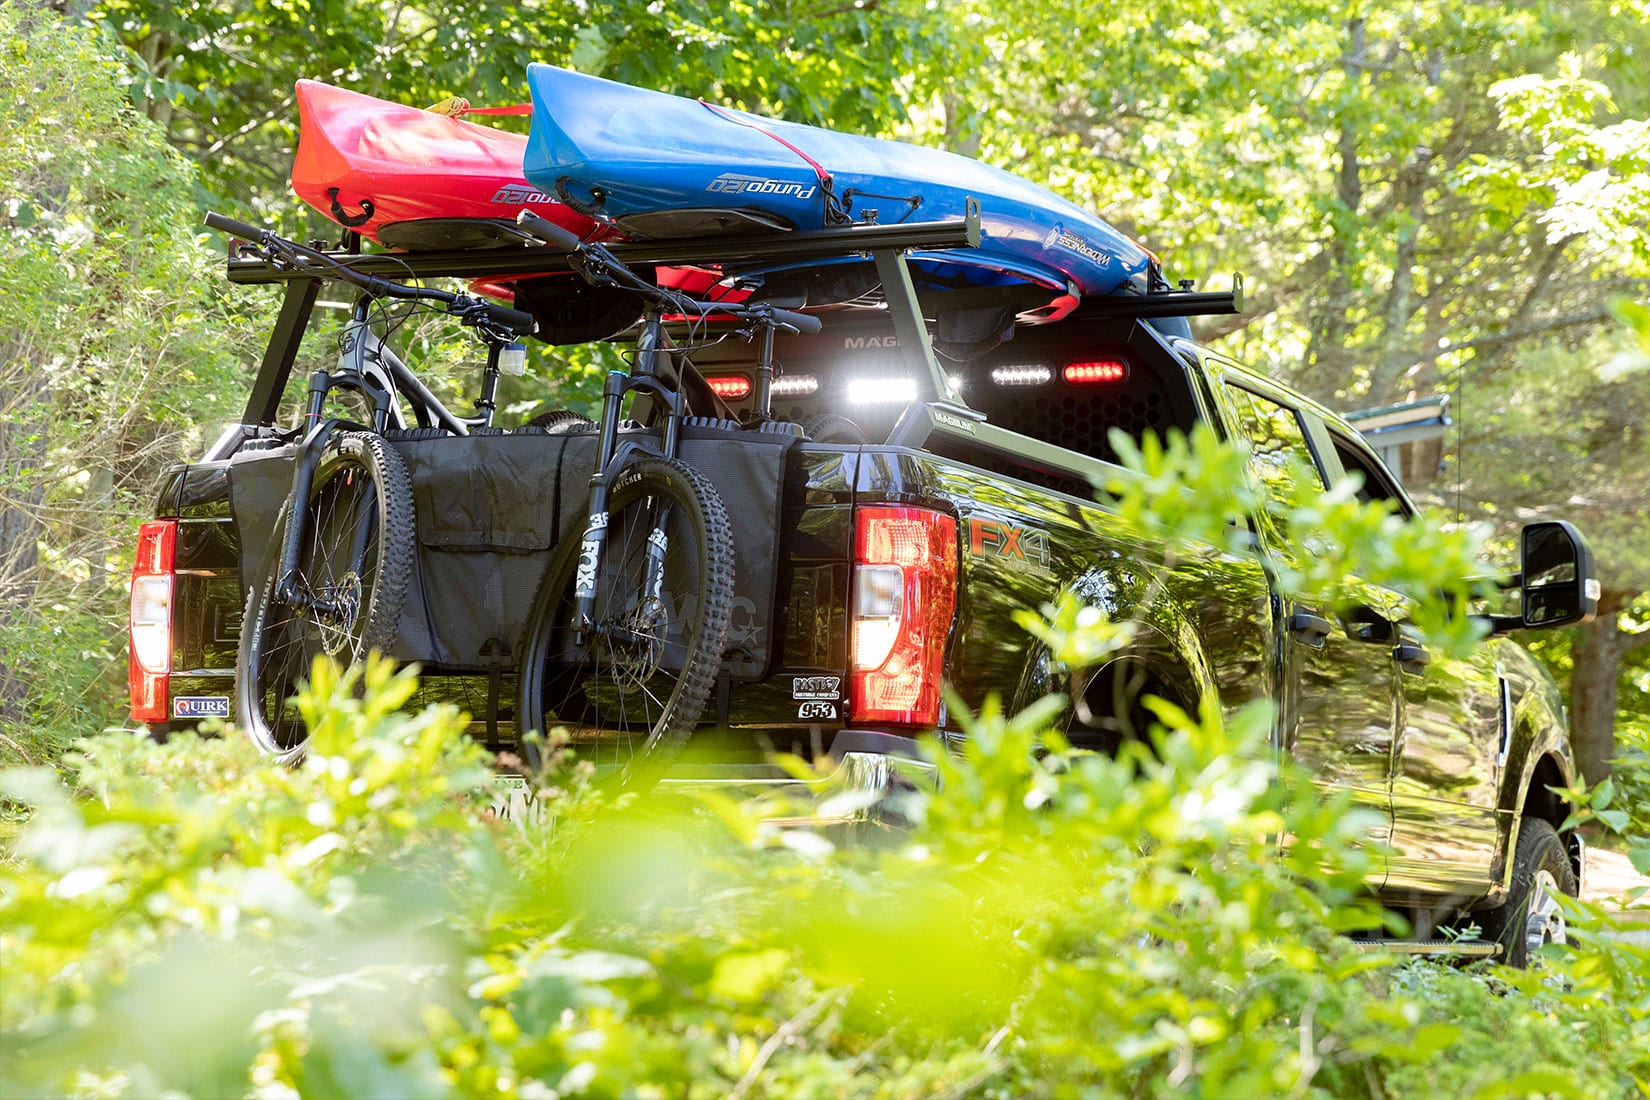 Black pickup truck decked out with a Magnum low pro honeycomb headache rack, bed rails, rear cargo rack - loaded with kayaks driving off-road.